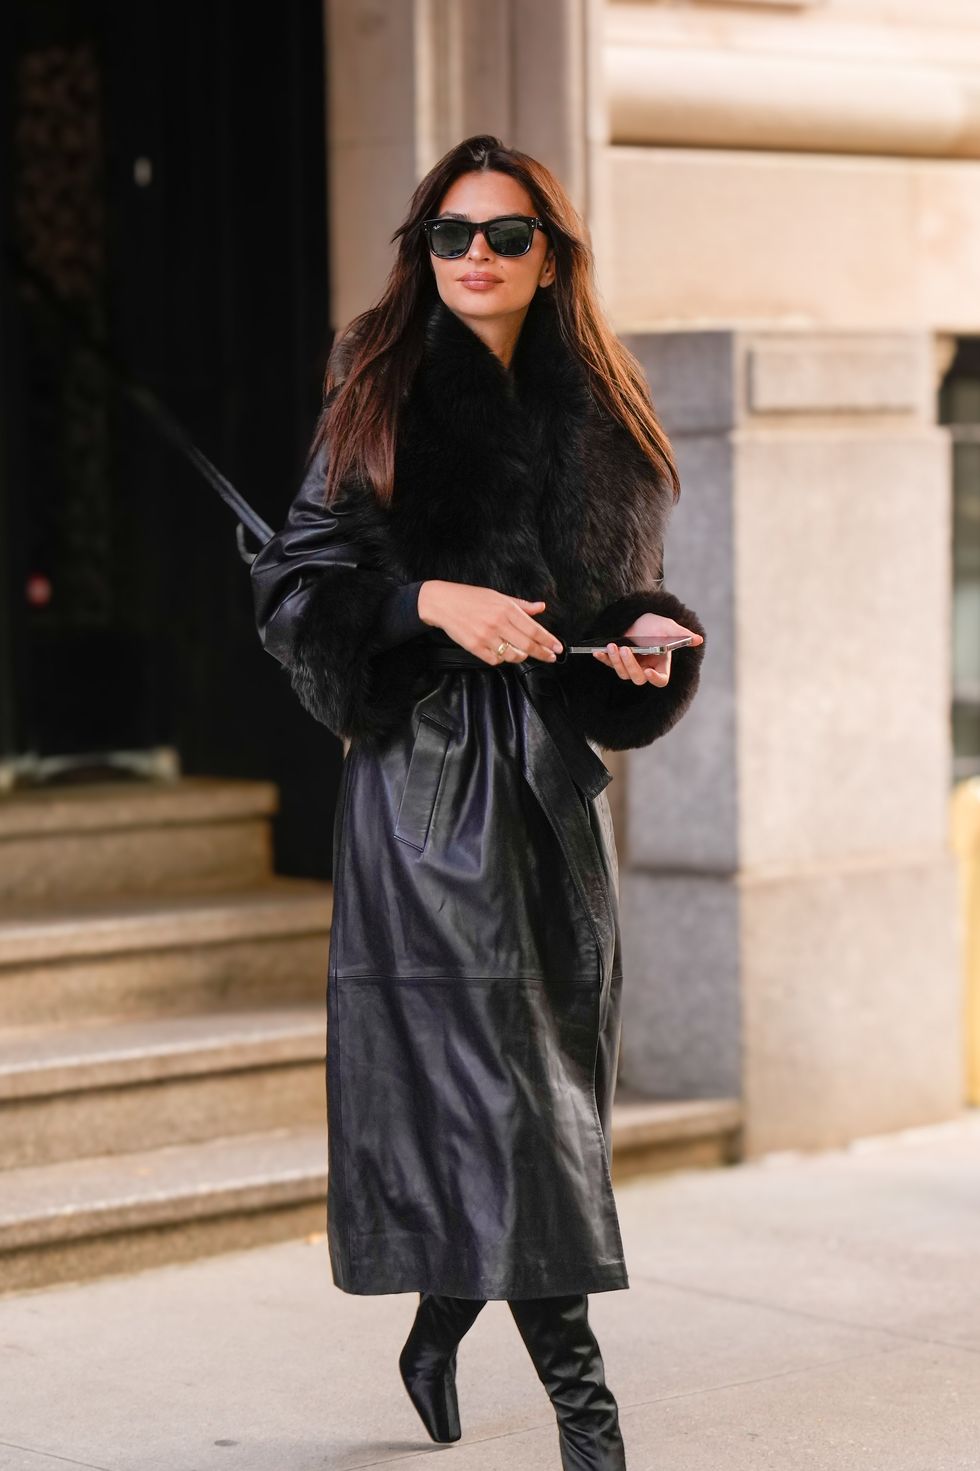 Emily Ratajkowksi wears the perfect leather trench